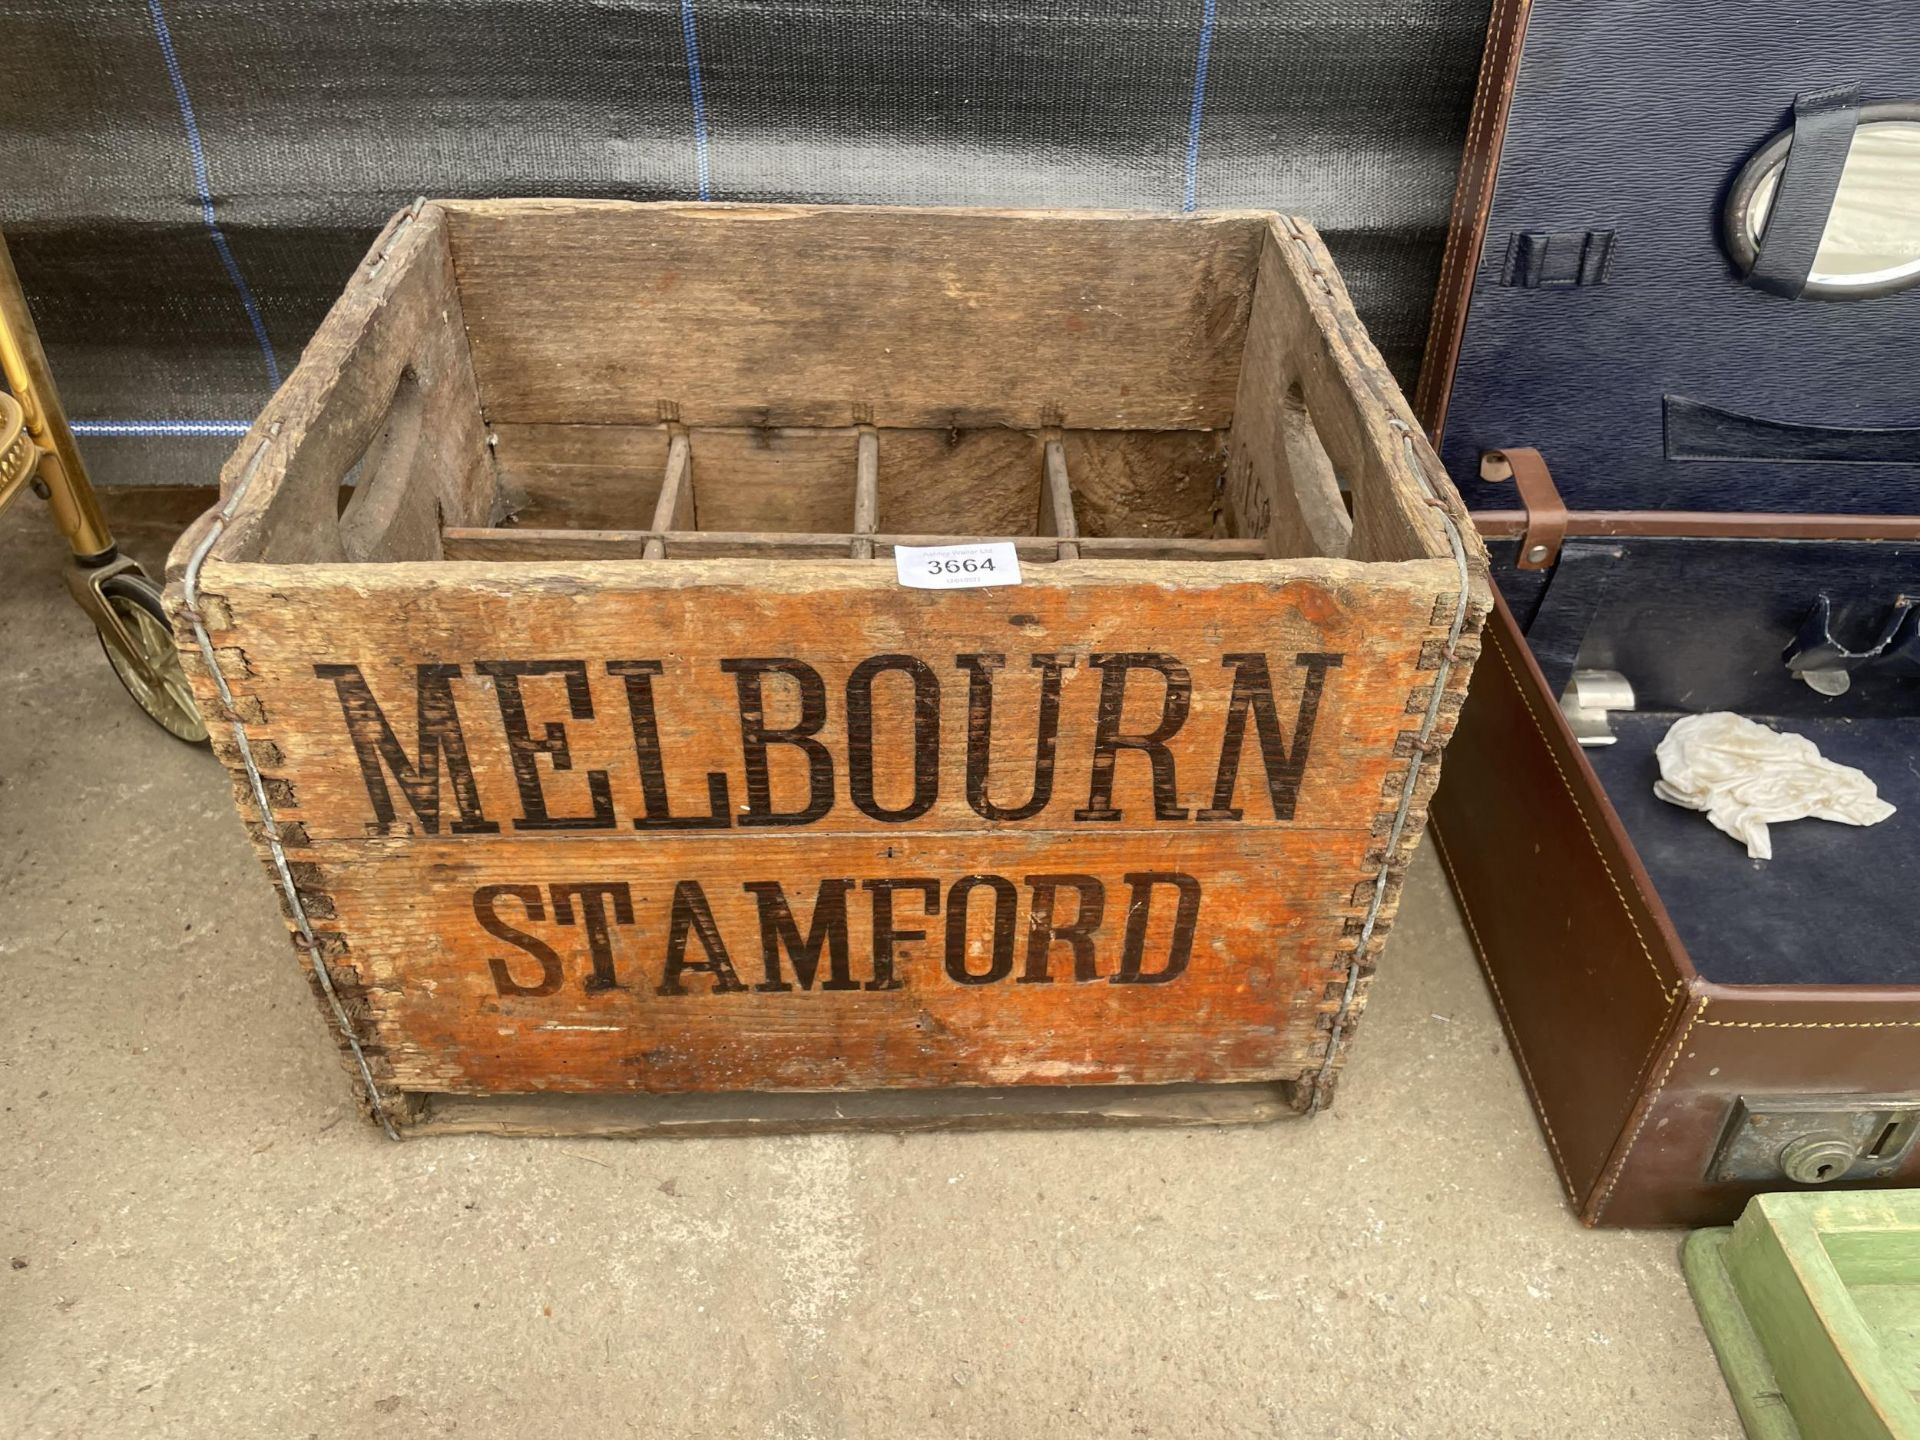 A MIXED LOT TO INCLUDE LEATHER TRAVELLING SUITCASE, MELBOURNE STAMFORD VINTAGE WOODEN BOTTLE CRATE - Image 2 of 3